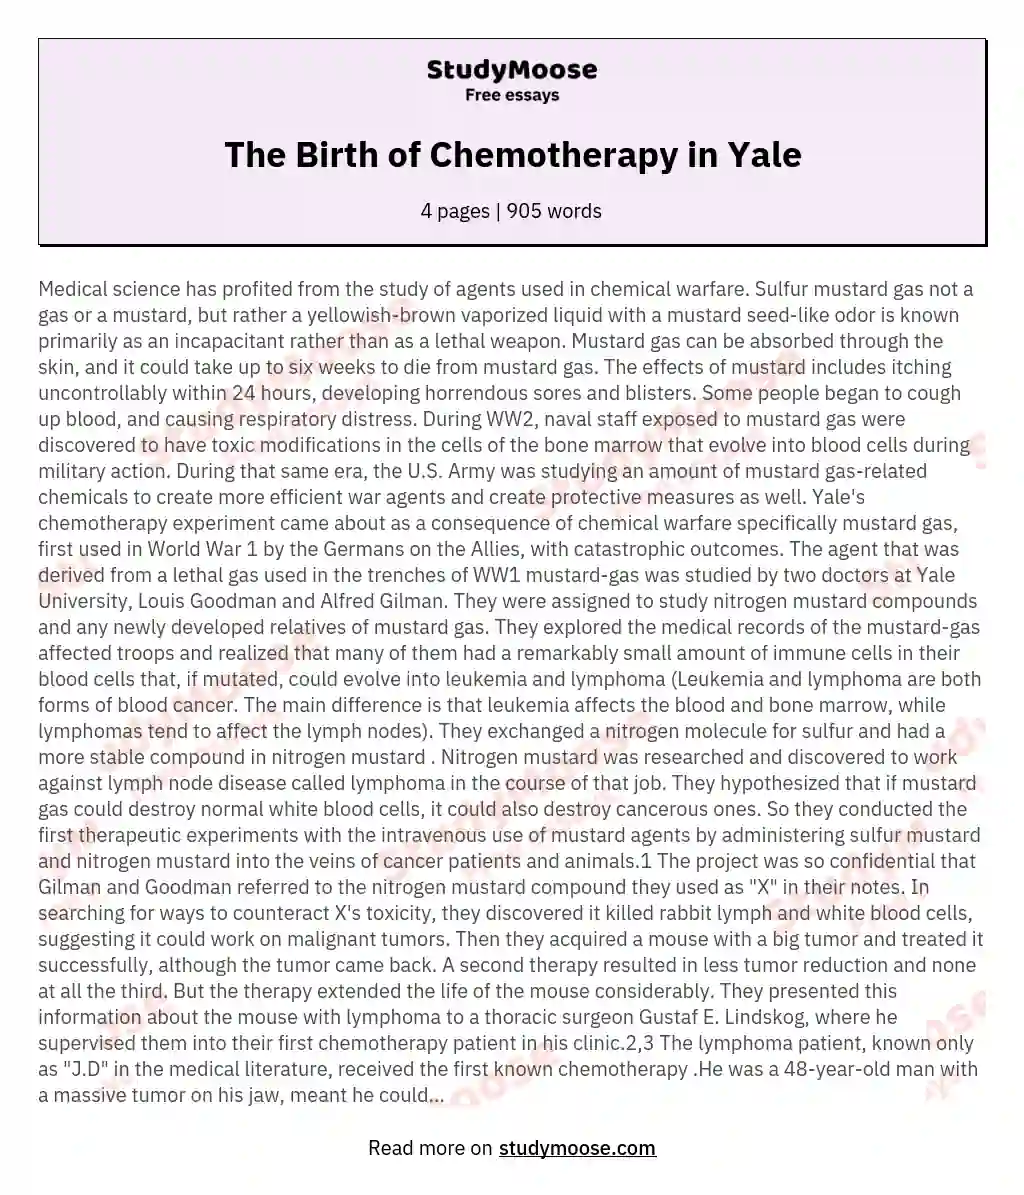 The Birth of Chemotherapy in Yale essay